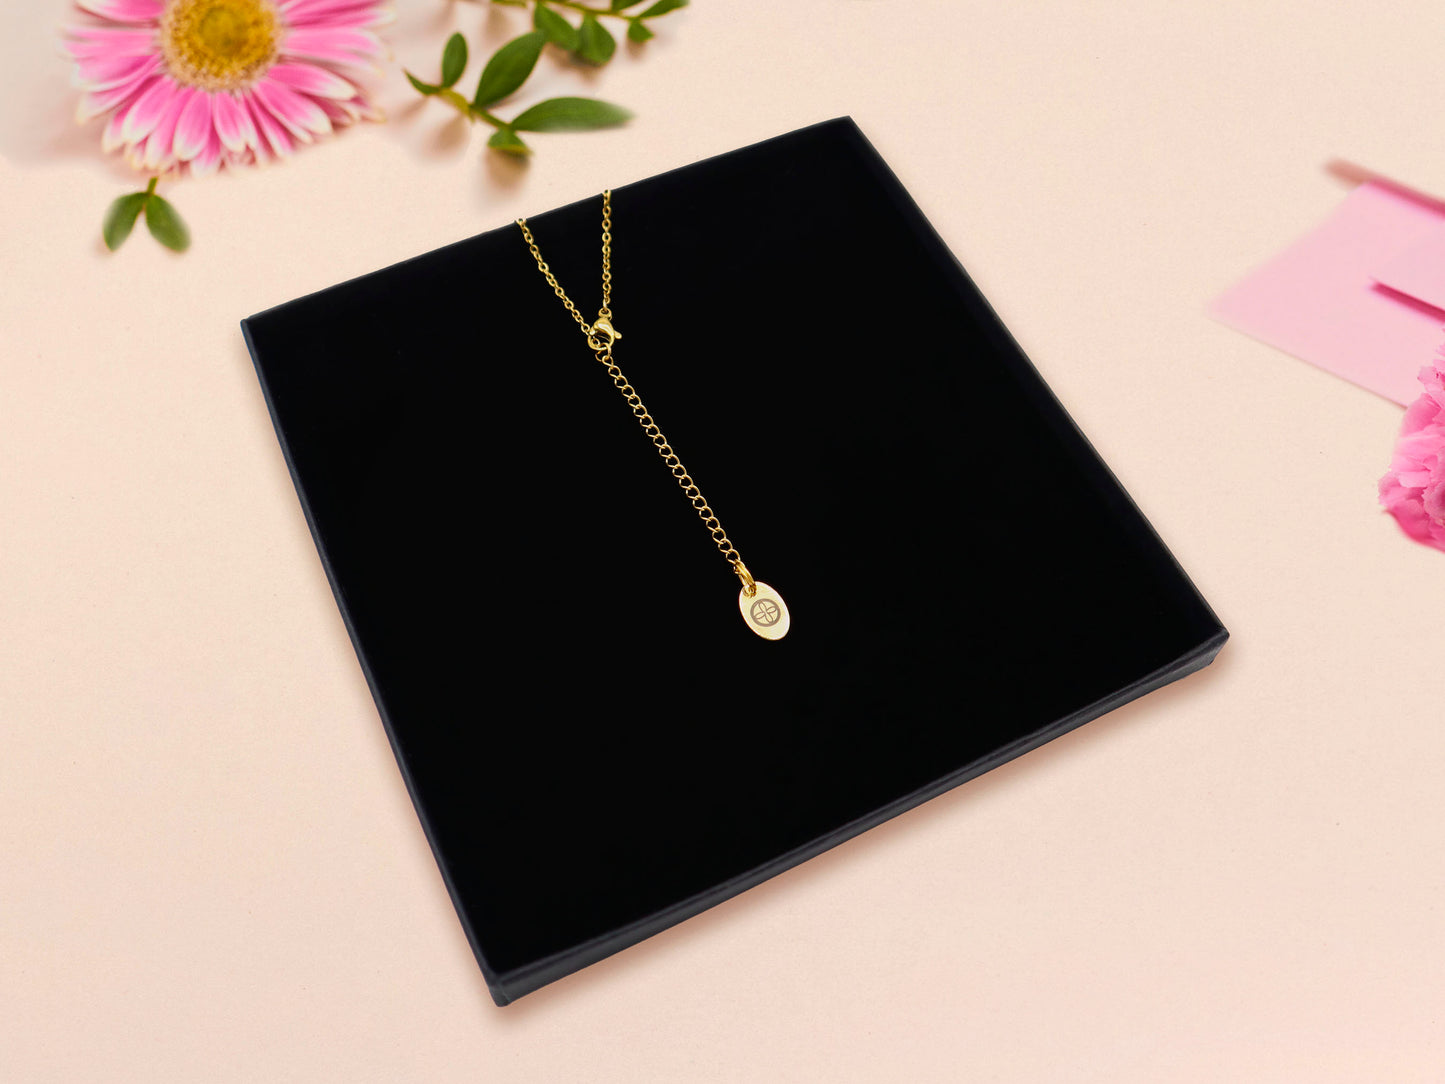 Gold chain with gold extender and Nona Gallery tag charm in black gift box.